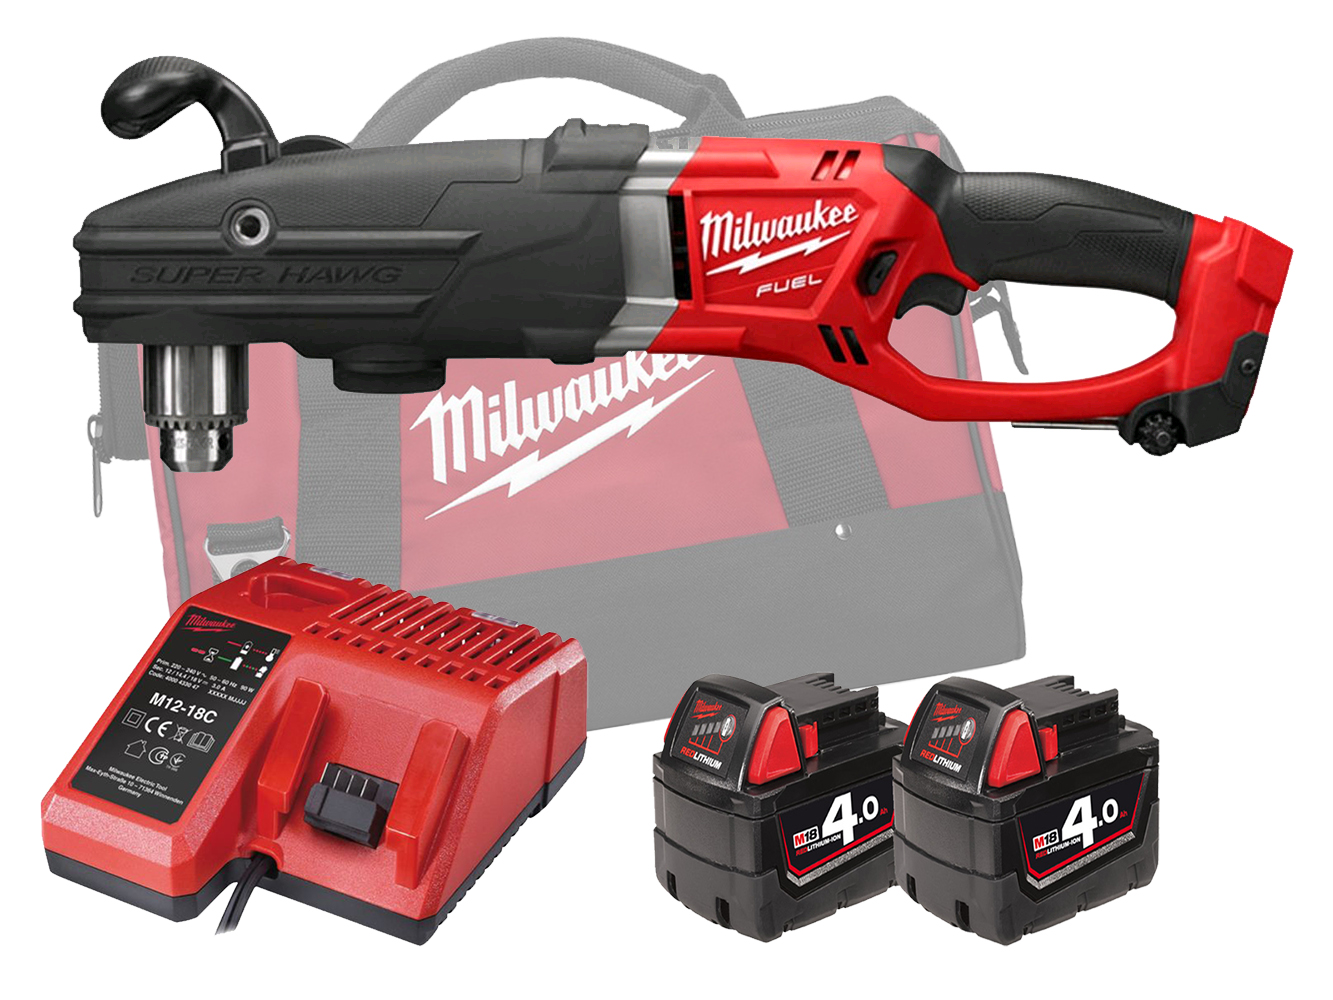 Milwaukee M18FRAD2 18V Fuel Super Hawg Right Angle Drill - 4.0Ah Pack